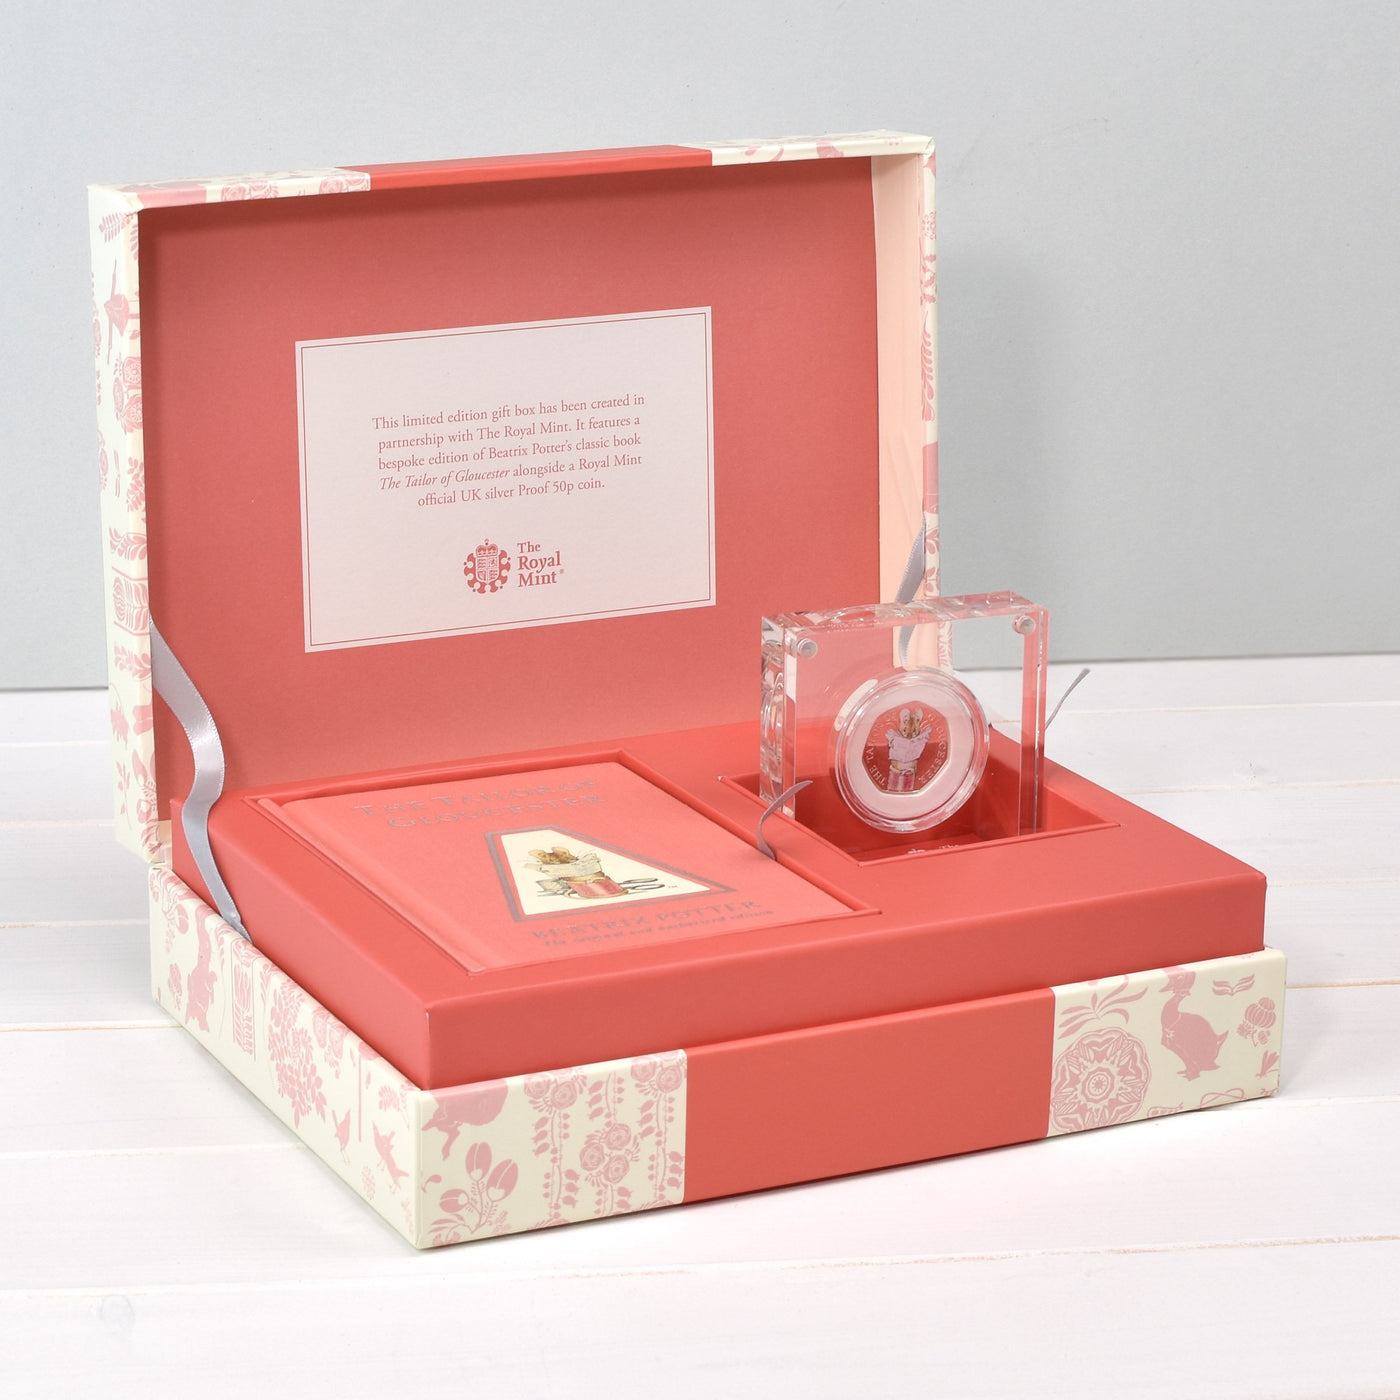 Tailor of Gloucester Royal Mint Silver Proof Coin & Book Set - Shop Personalised Gifts